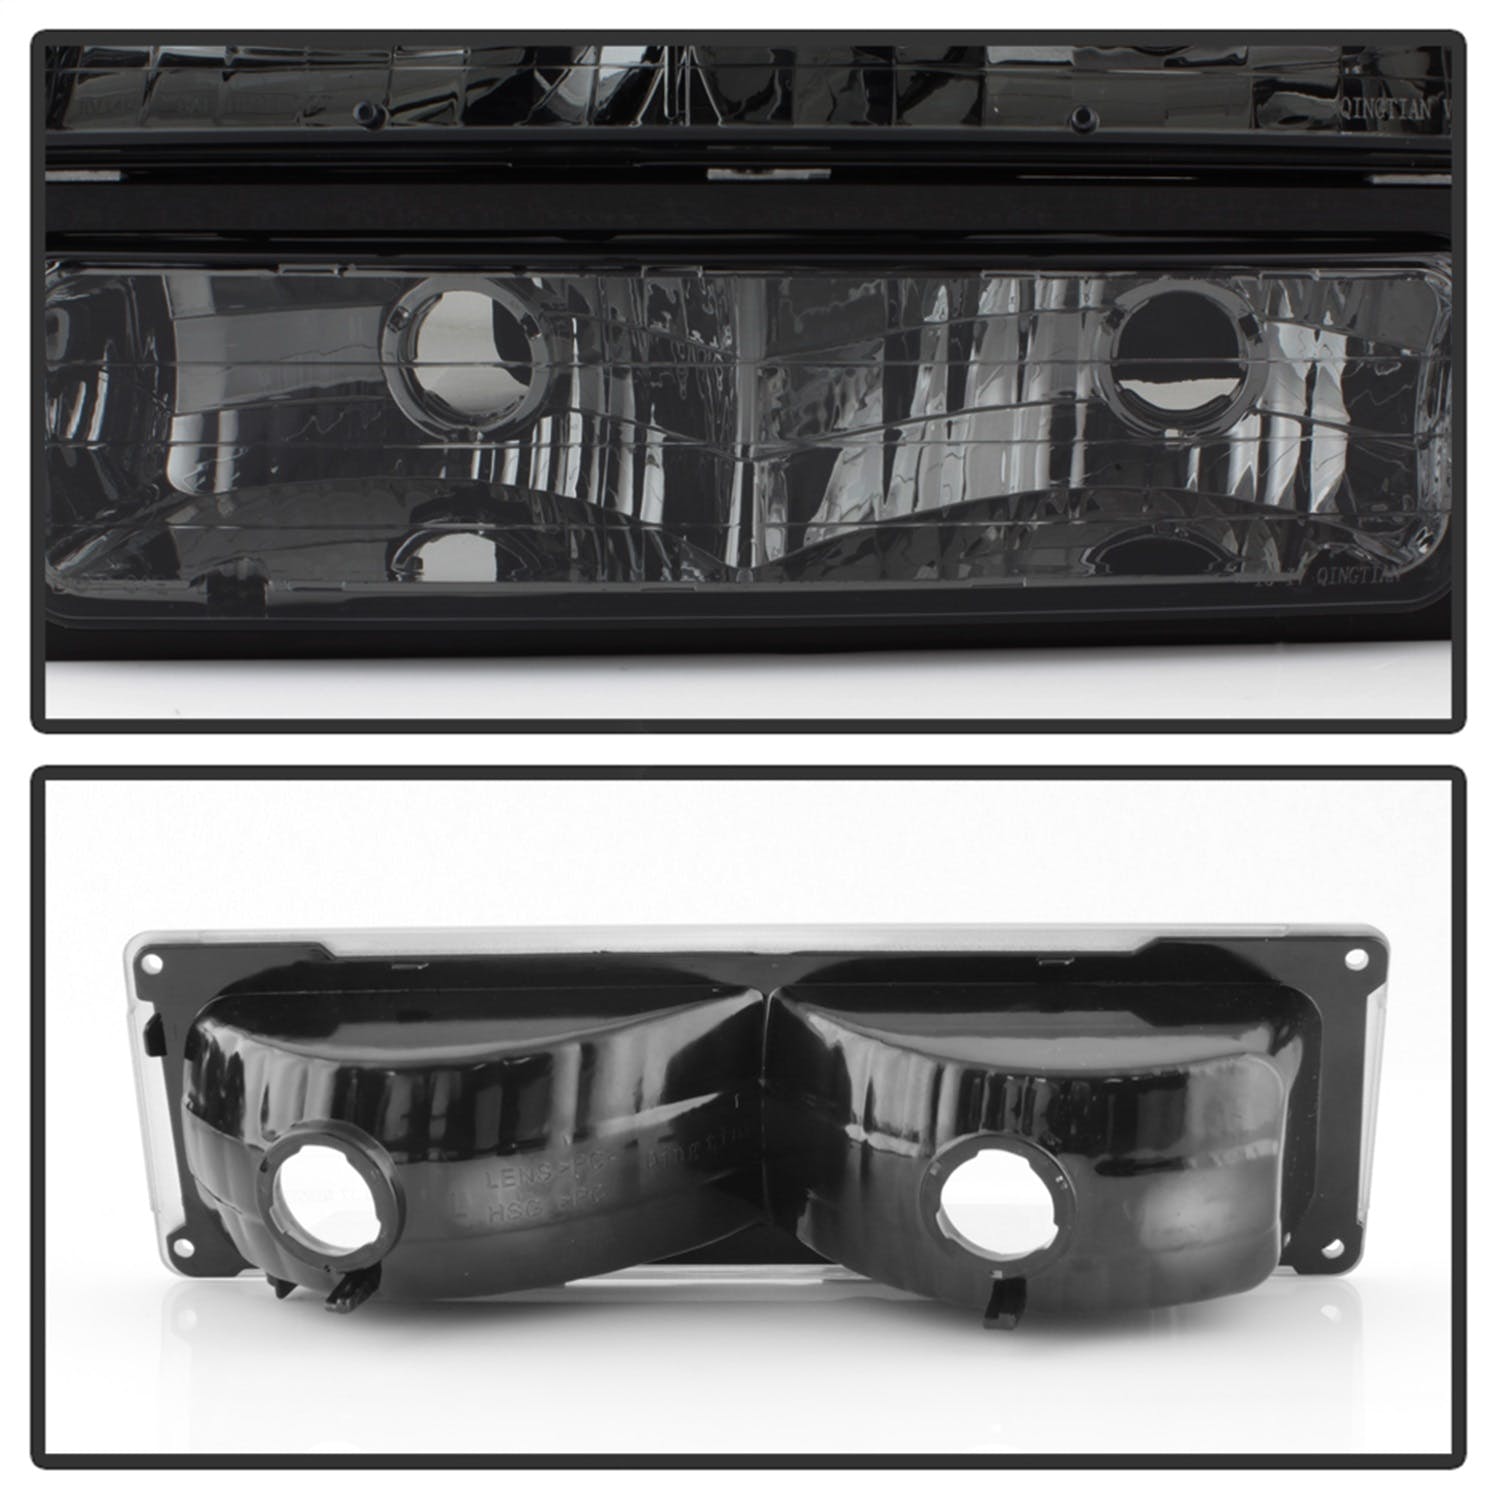 XTUNE POWER 5072238 Chevy C K Series 1500 2500 3500 94 98 Chevy Tahoe 95 99 Chevy Silverado 94 98 Chevy Suburban 94 98 Chevy Suburban 94 98 ( Not Compatible With Seal Beam Headlight ) Headlights with Corner and Parking Lights 8pcs sets Smoked